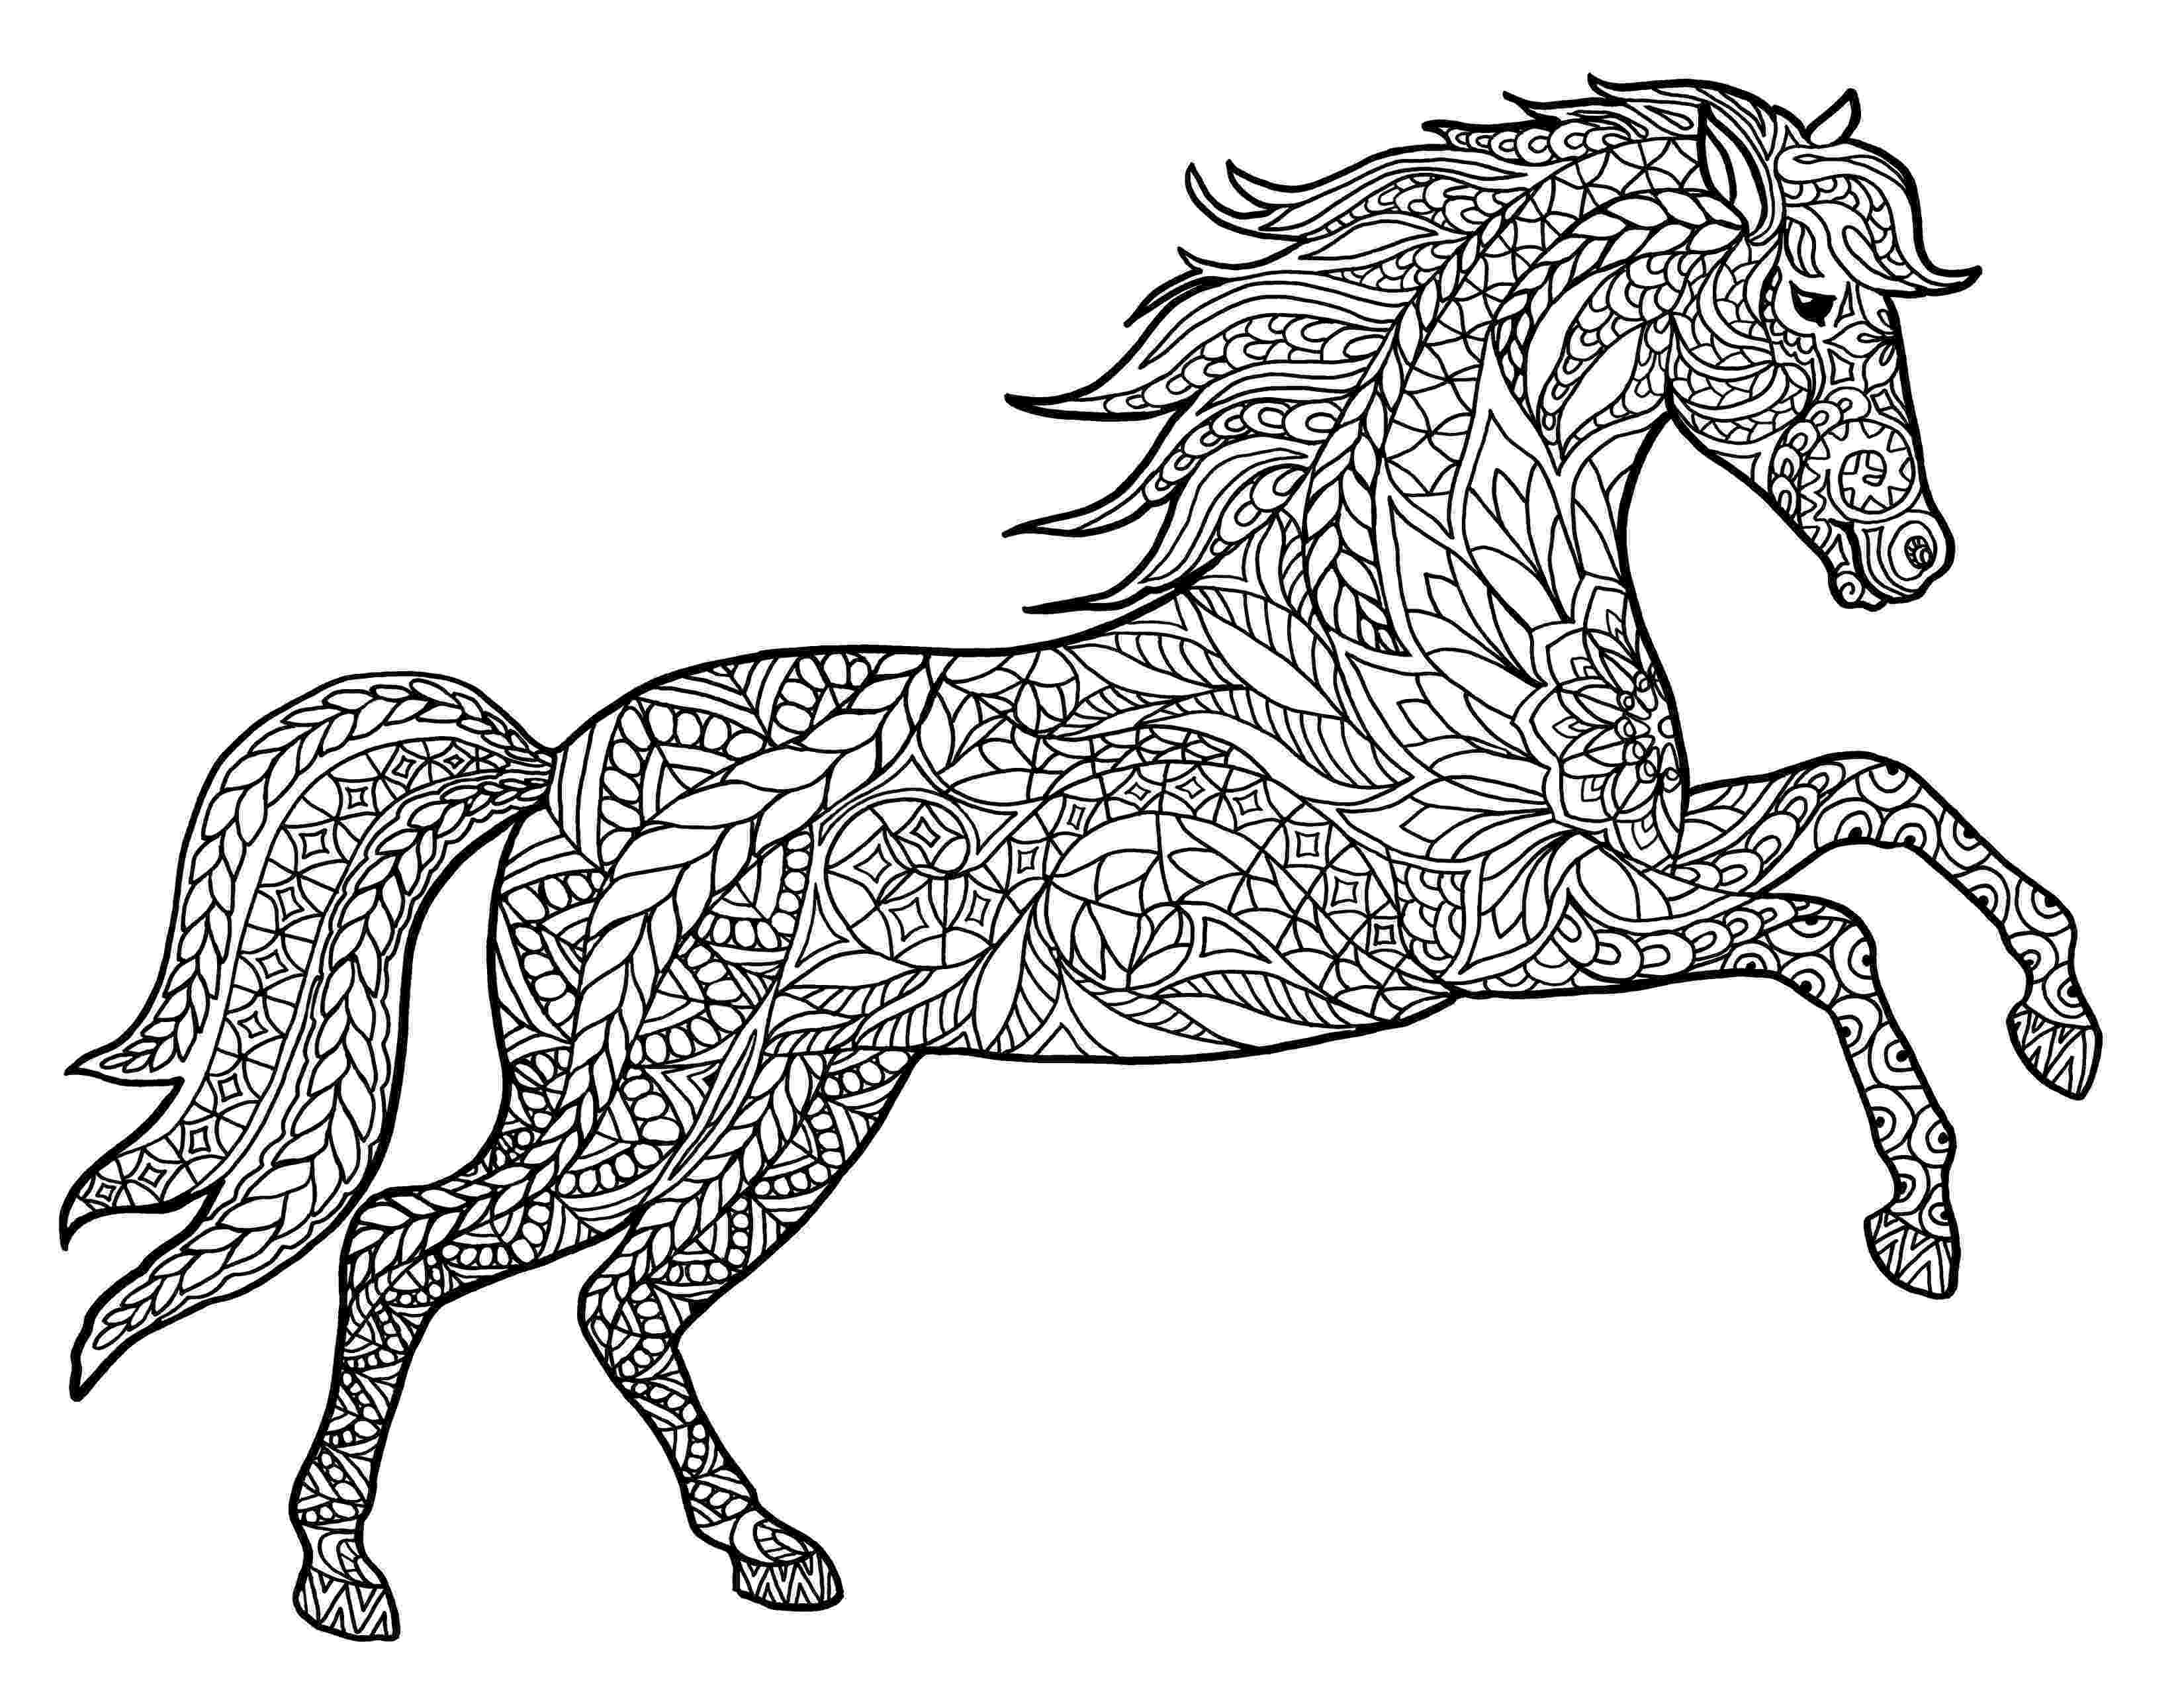 animal coloring pages adults animal coloring pages for adults best coloring pages for animal adults coloring pages 